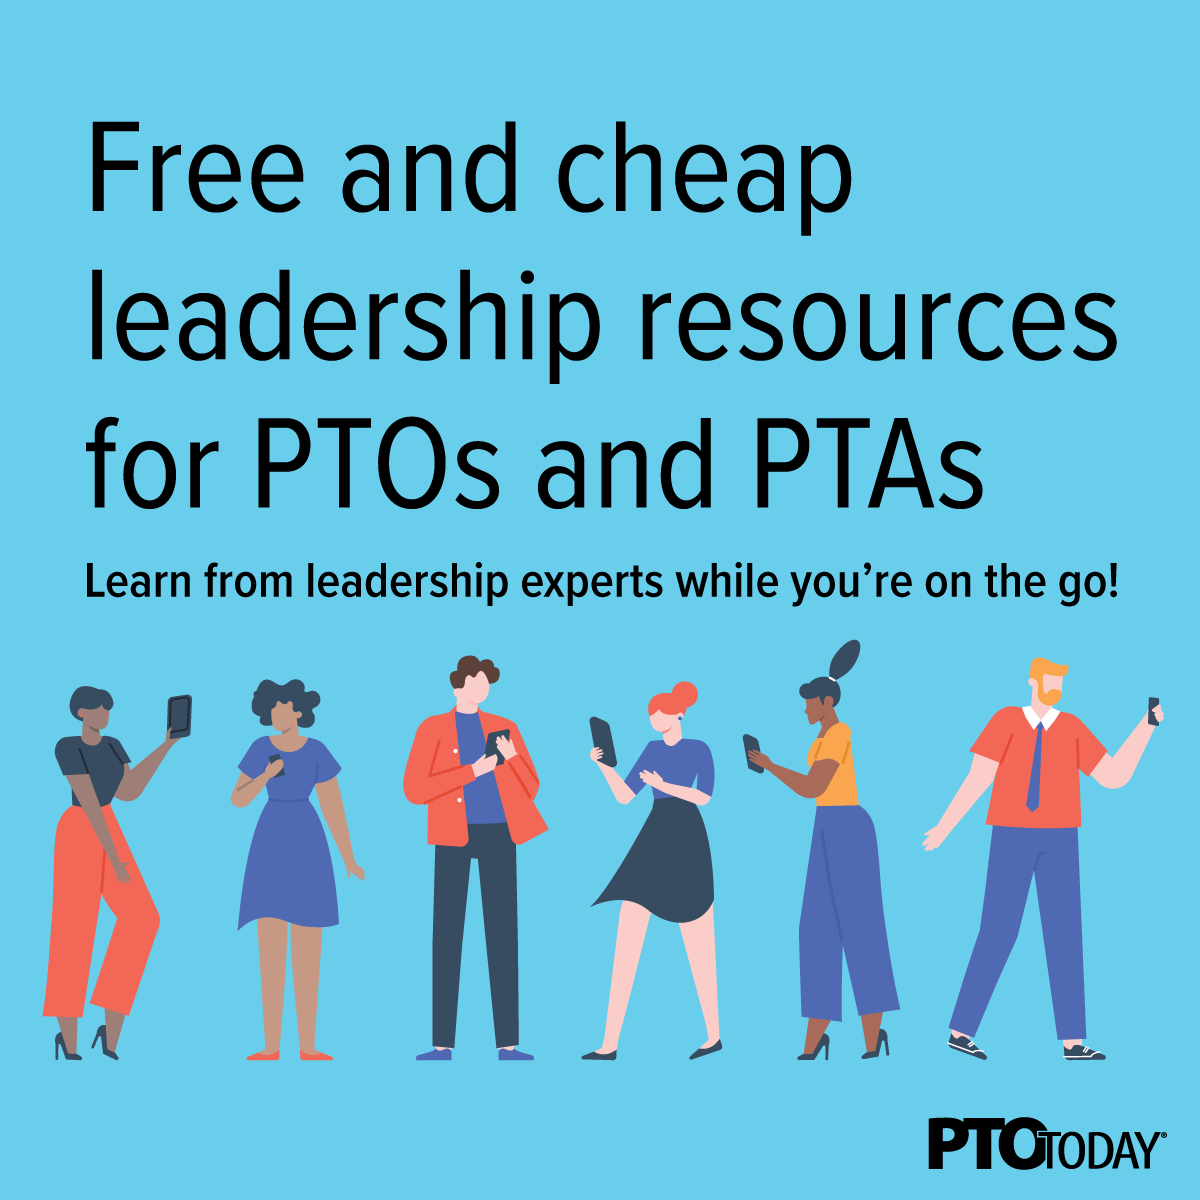 Free and cheap leadership resources